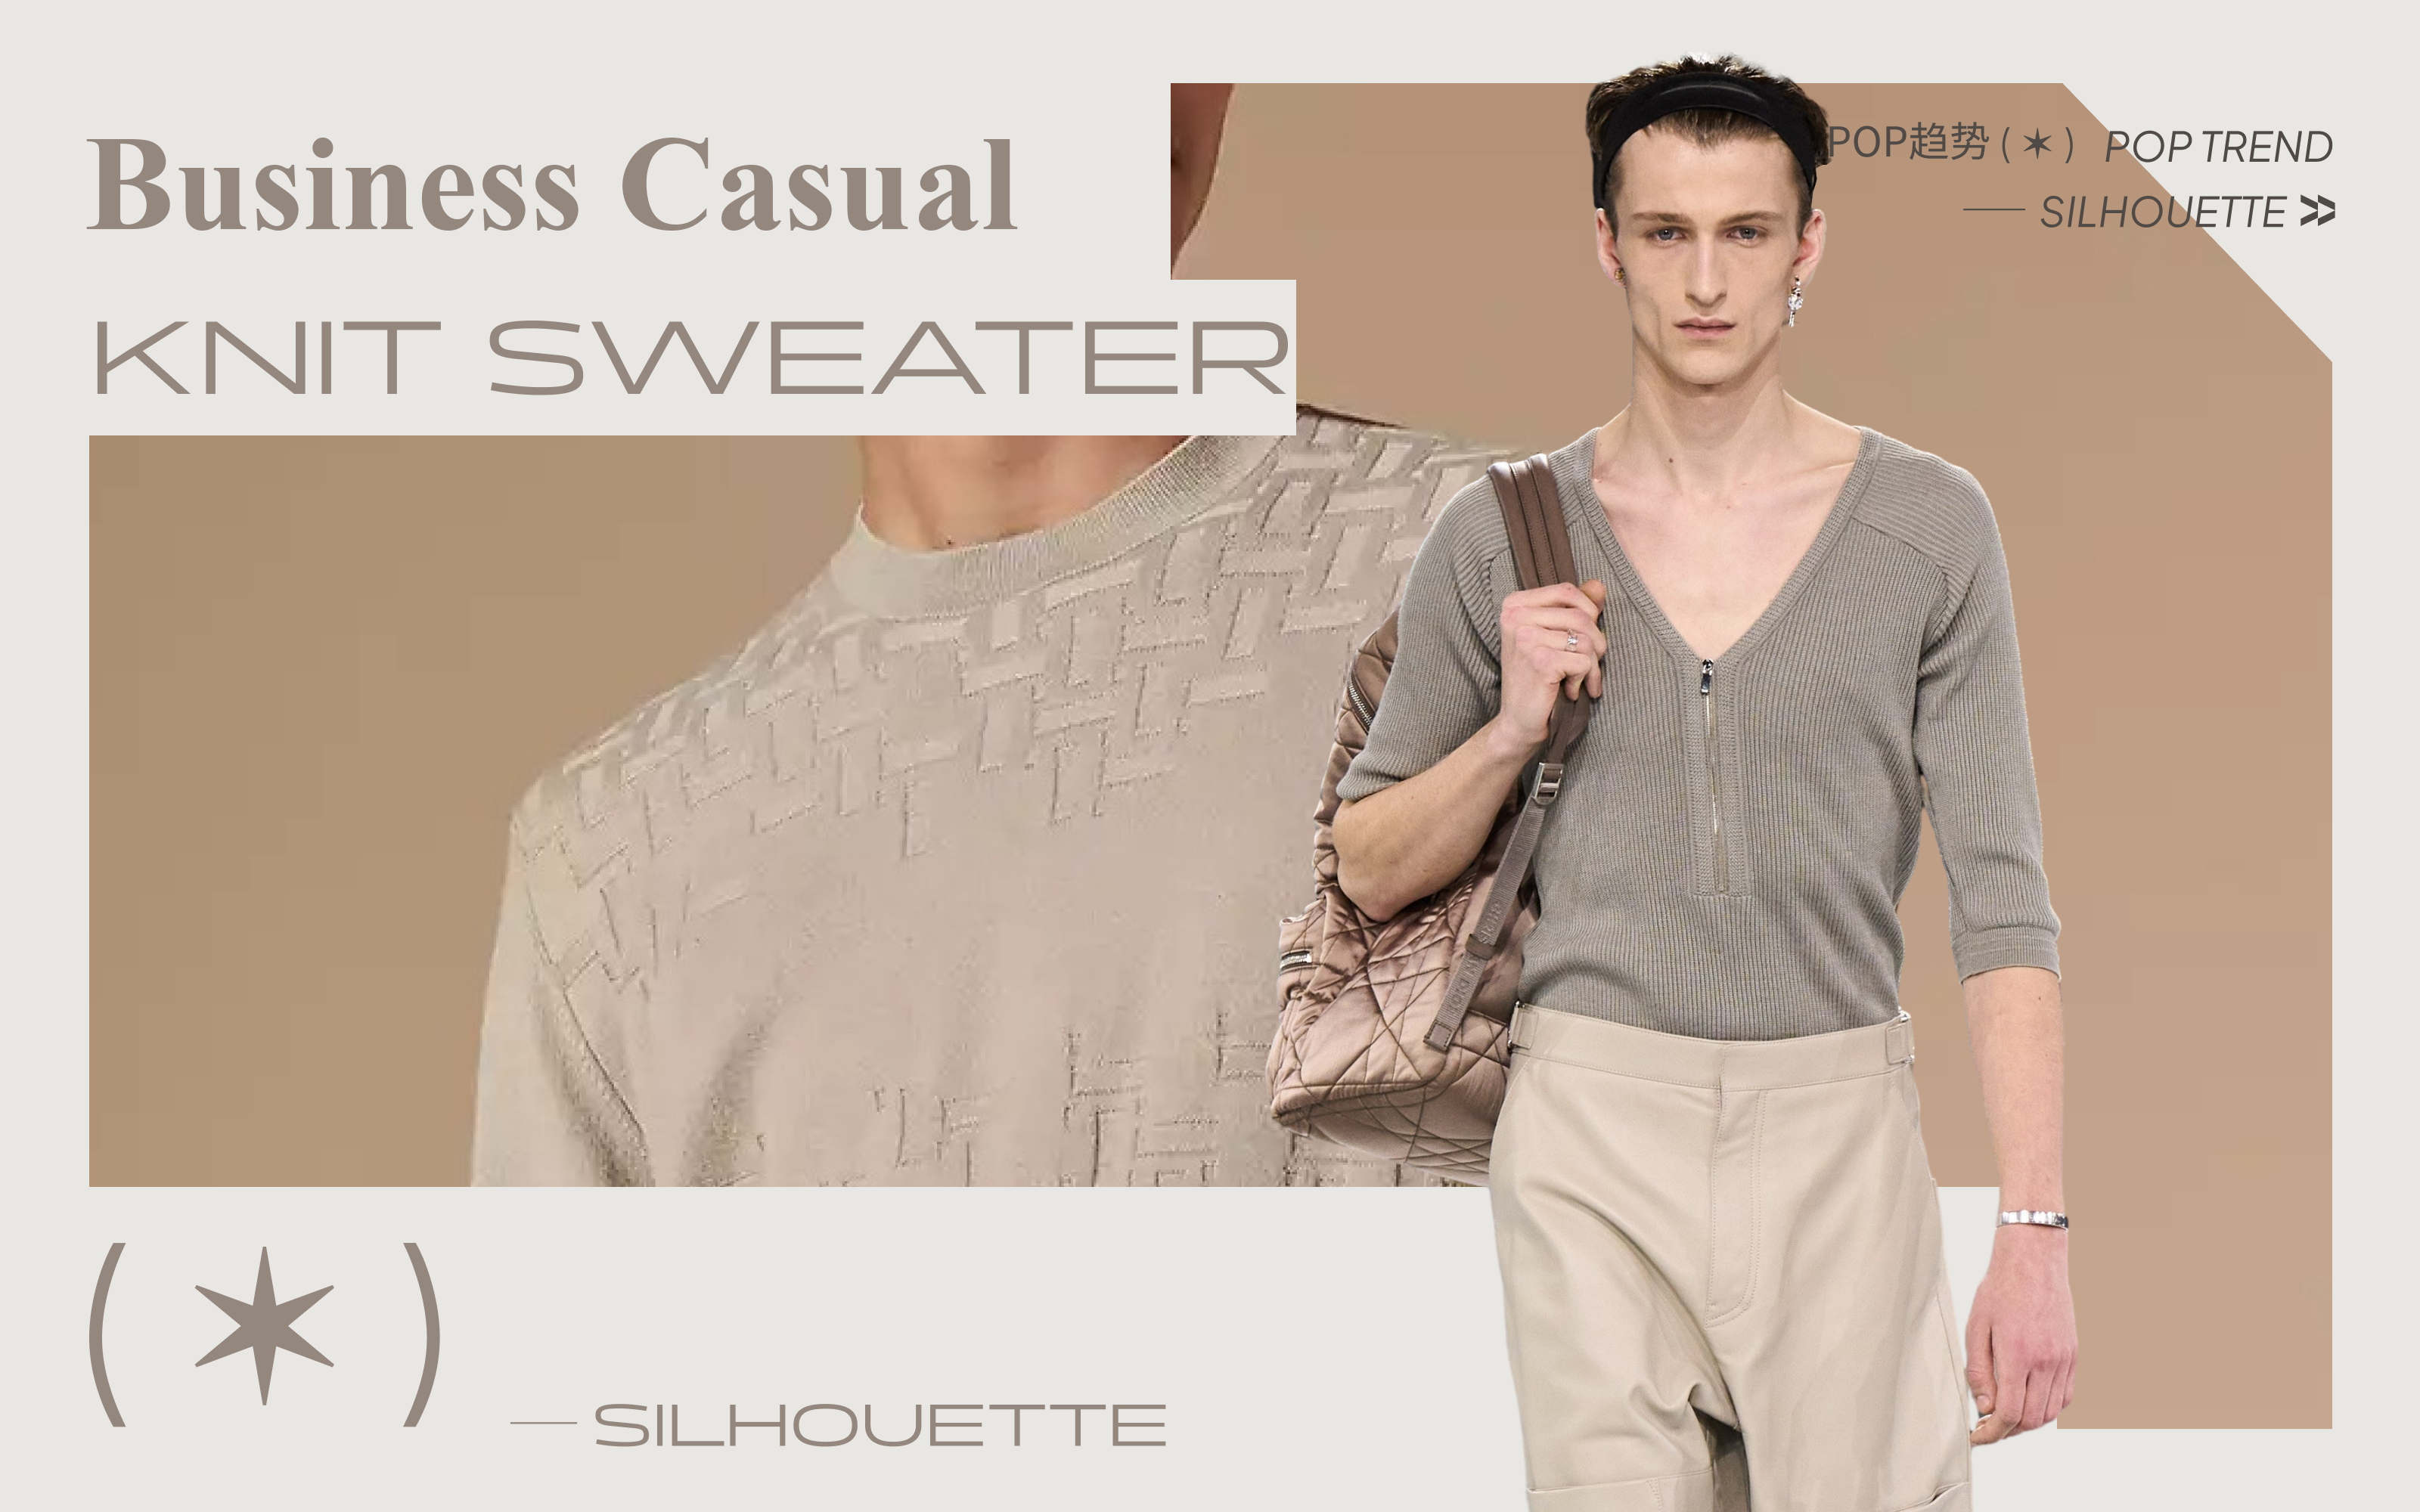 Business Casual -- The Silhouette Trend for Men's Knit Sweater